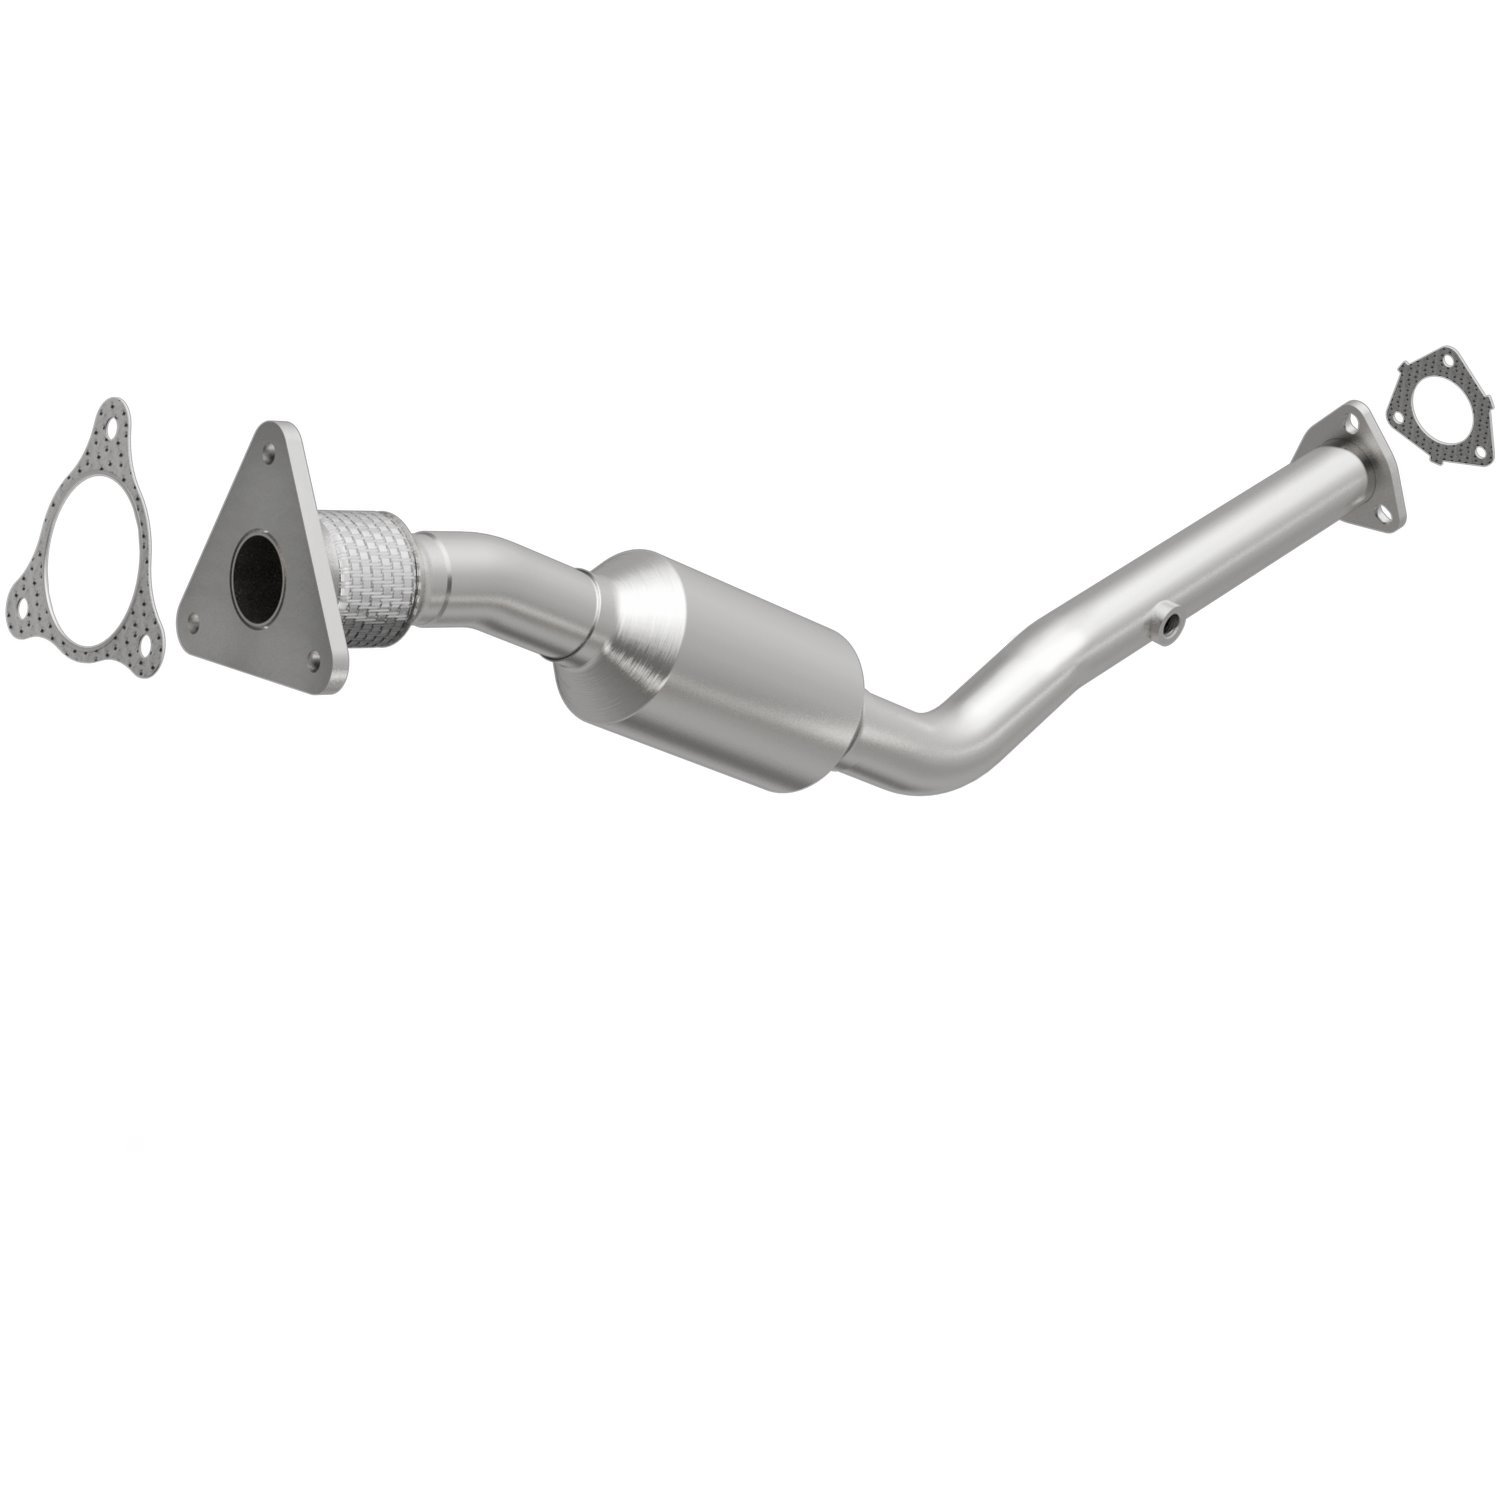 2003-2004 Saturn Ion HM Grade Federal / EPA Compliant Direct-Fit Catalytic Converter